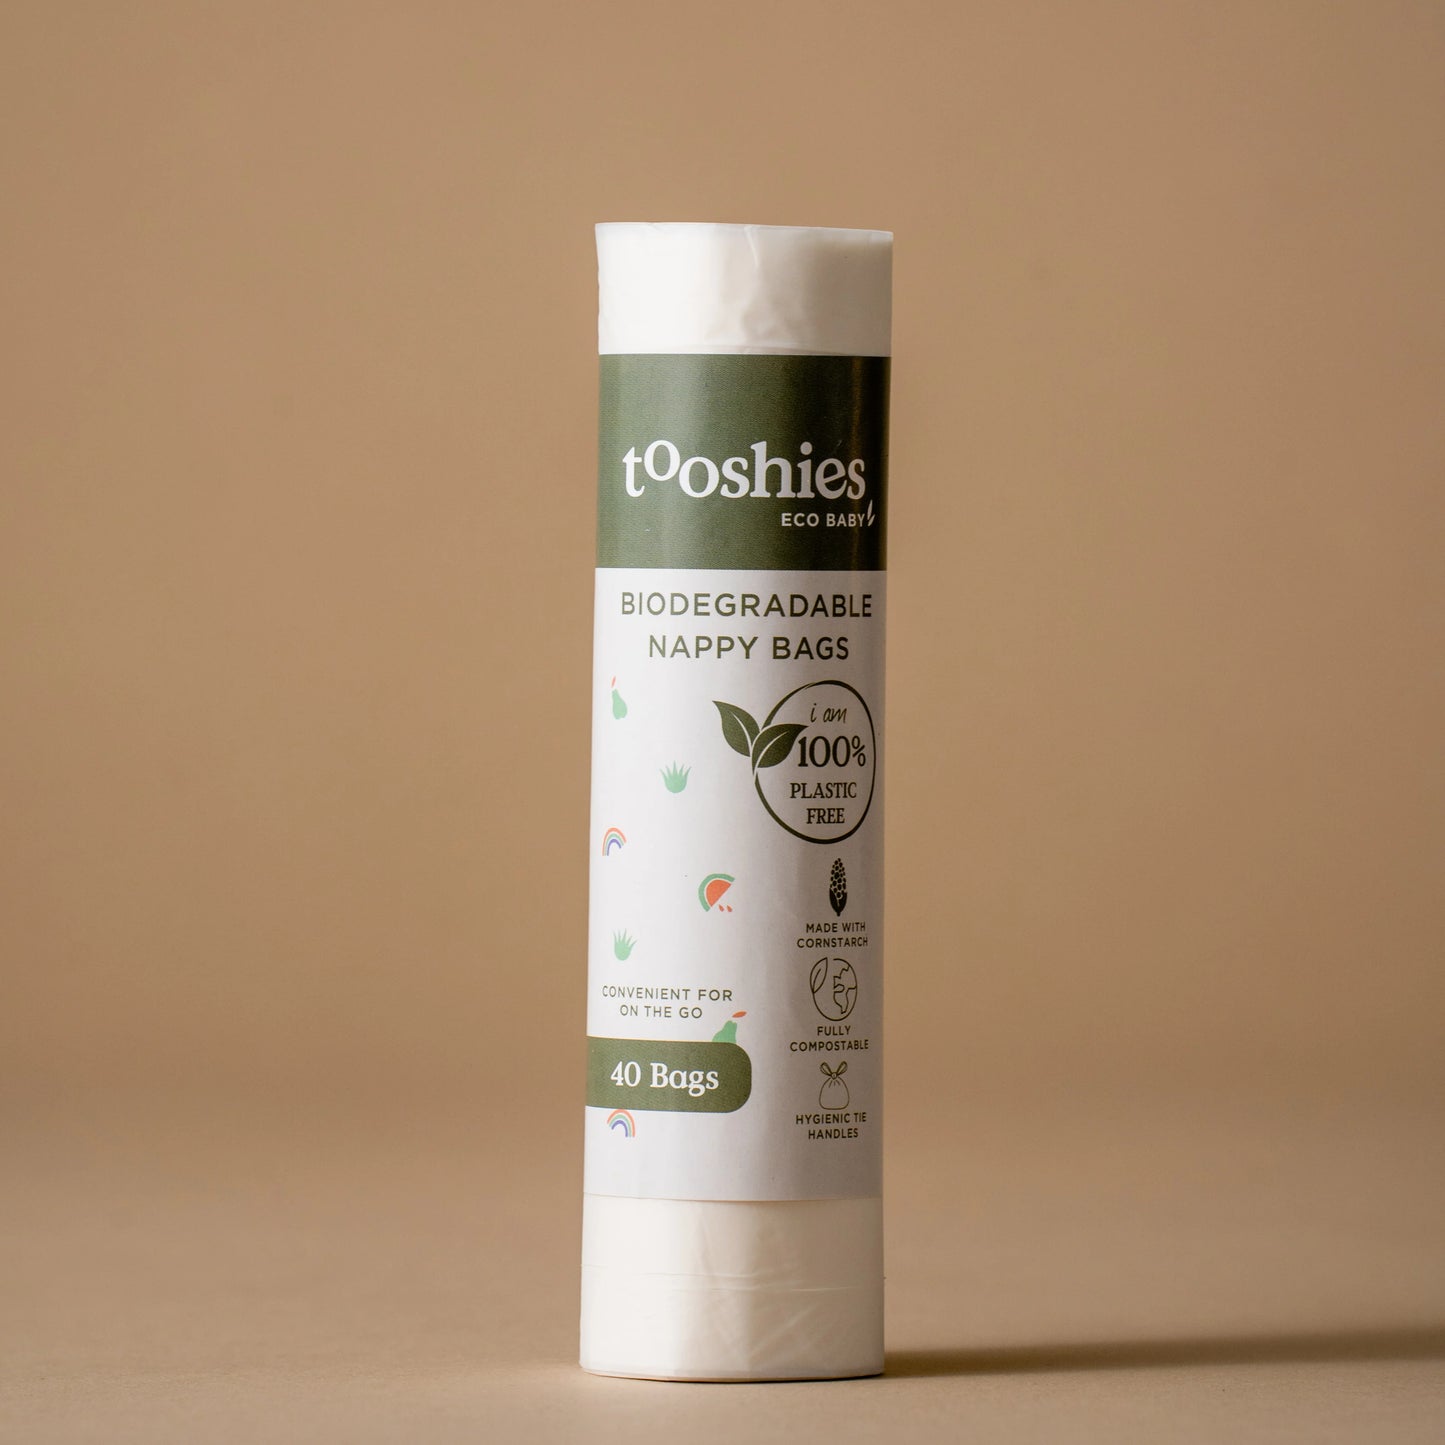 Tooshies - Biodegradable Nappy Bags